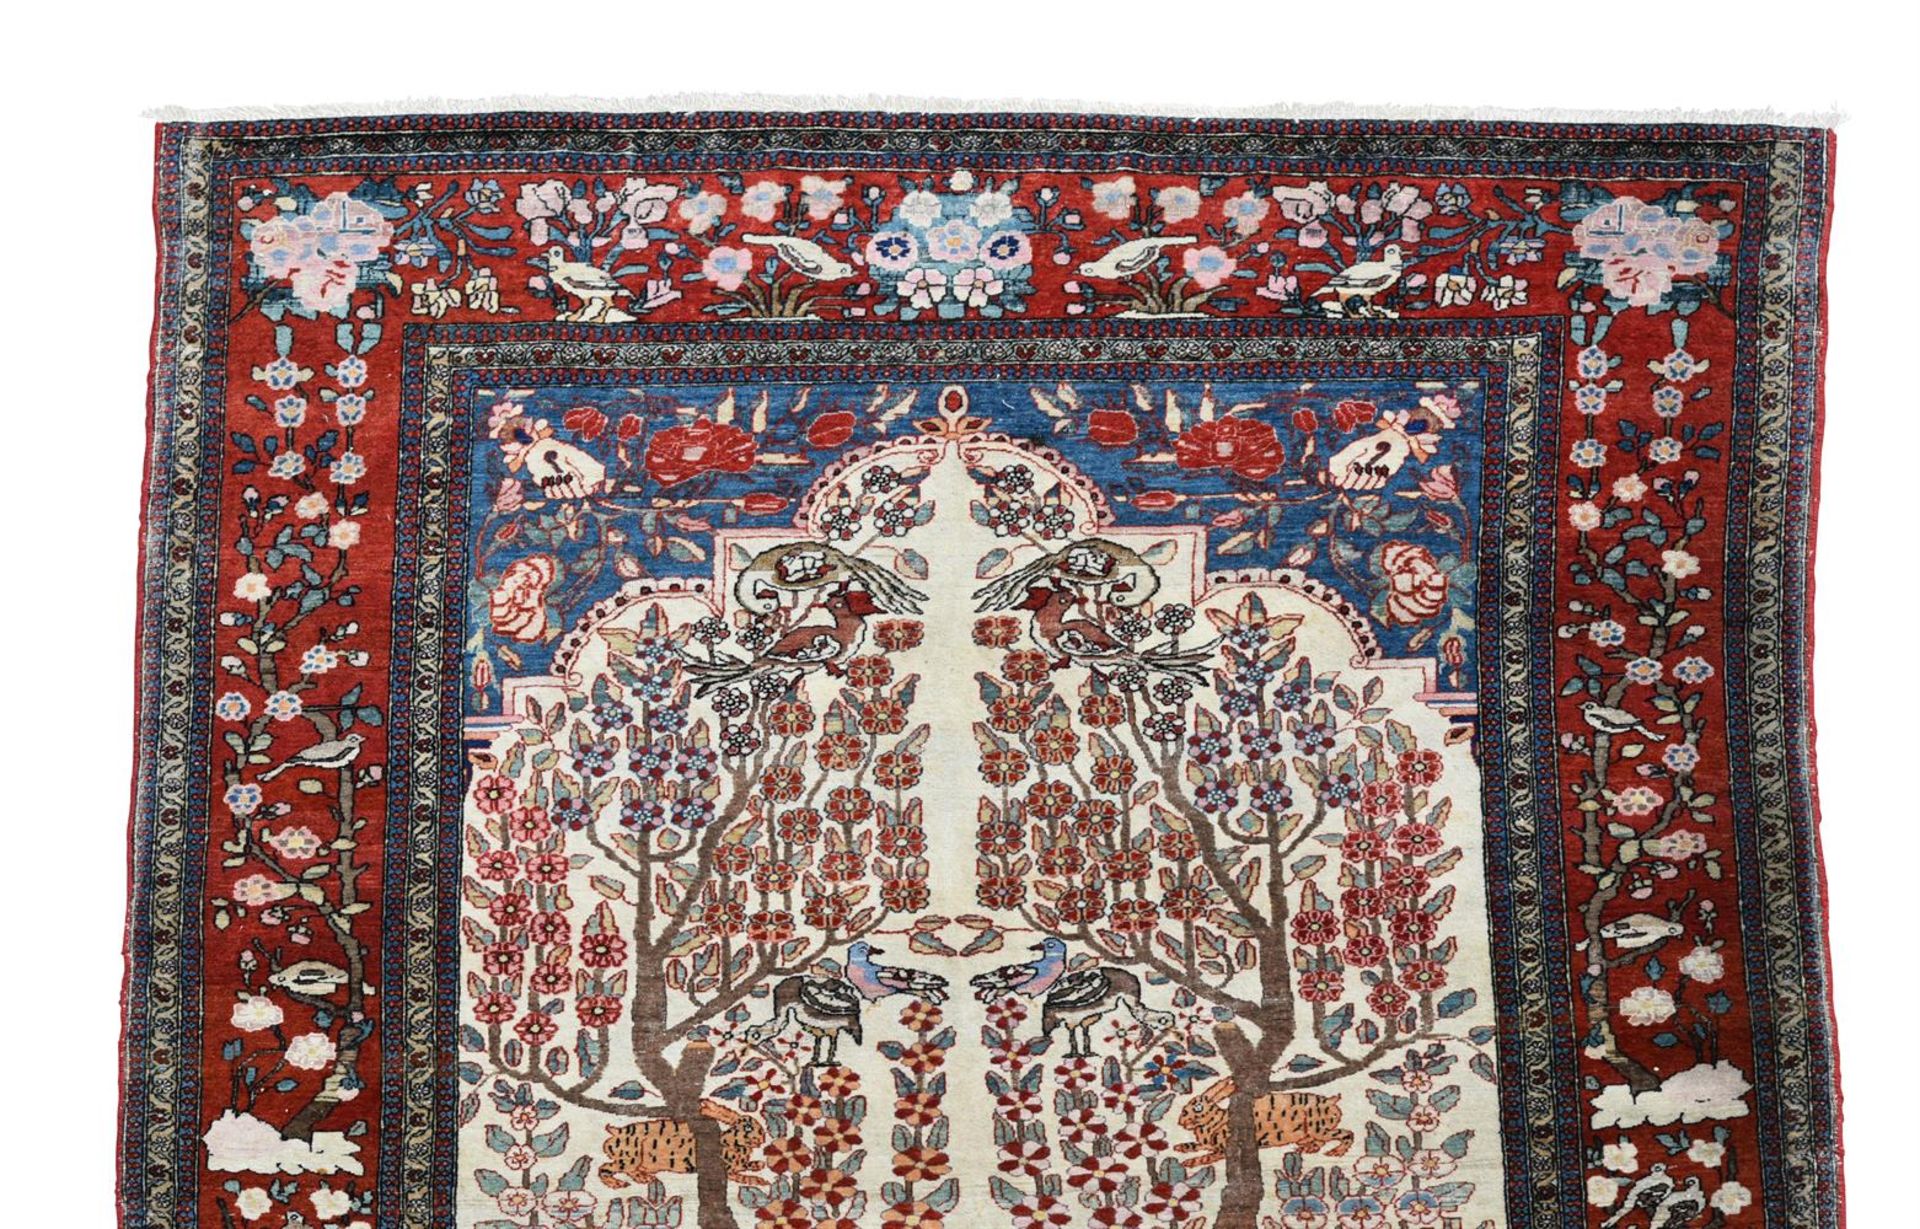 AN ISFAHAN PRAYER RUG CENTRAL PERSIA 1900 - Image 2 of 3